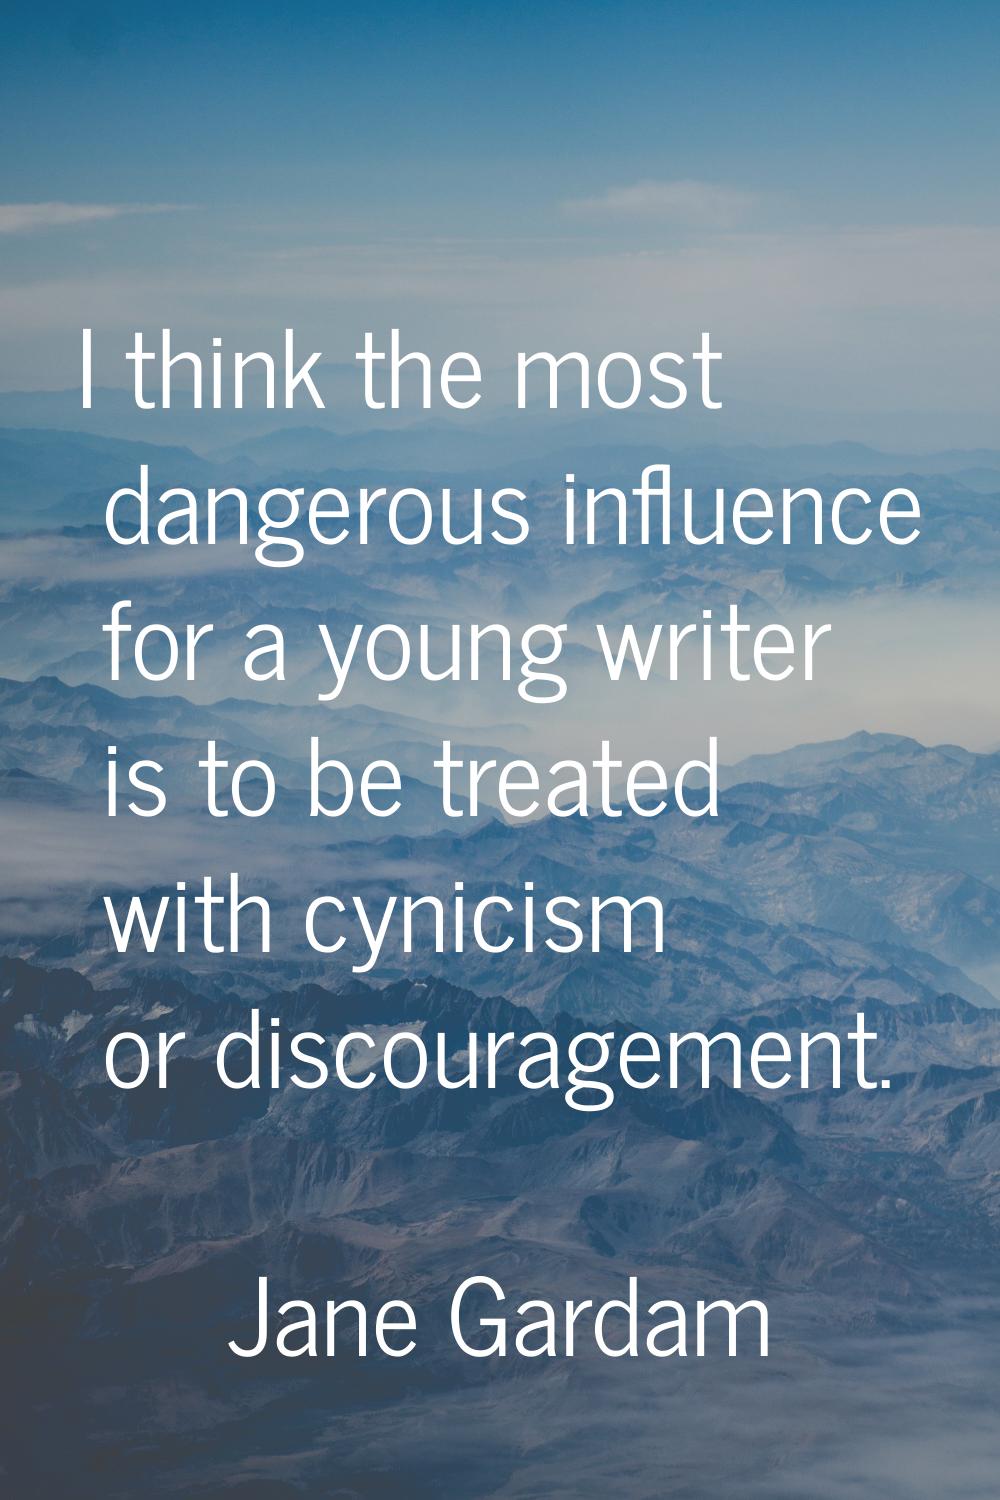 I think the most dangerous influence for a young writer is to be treated with cynicism or discourag